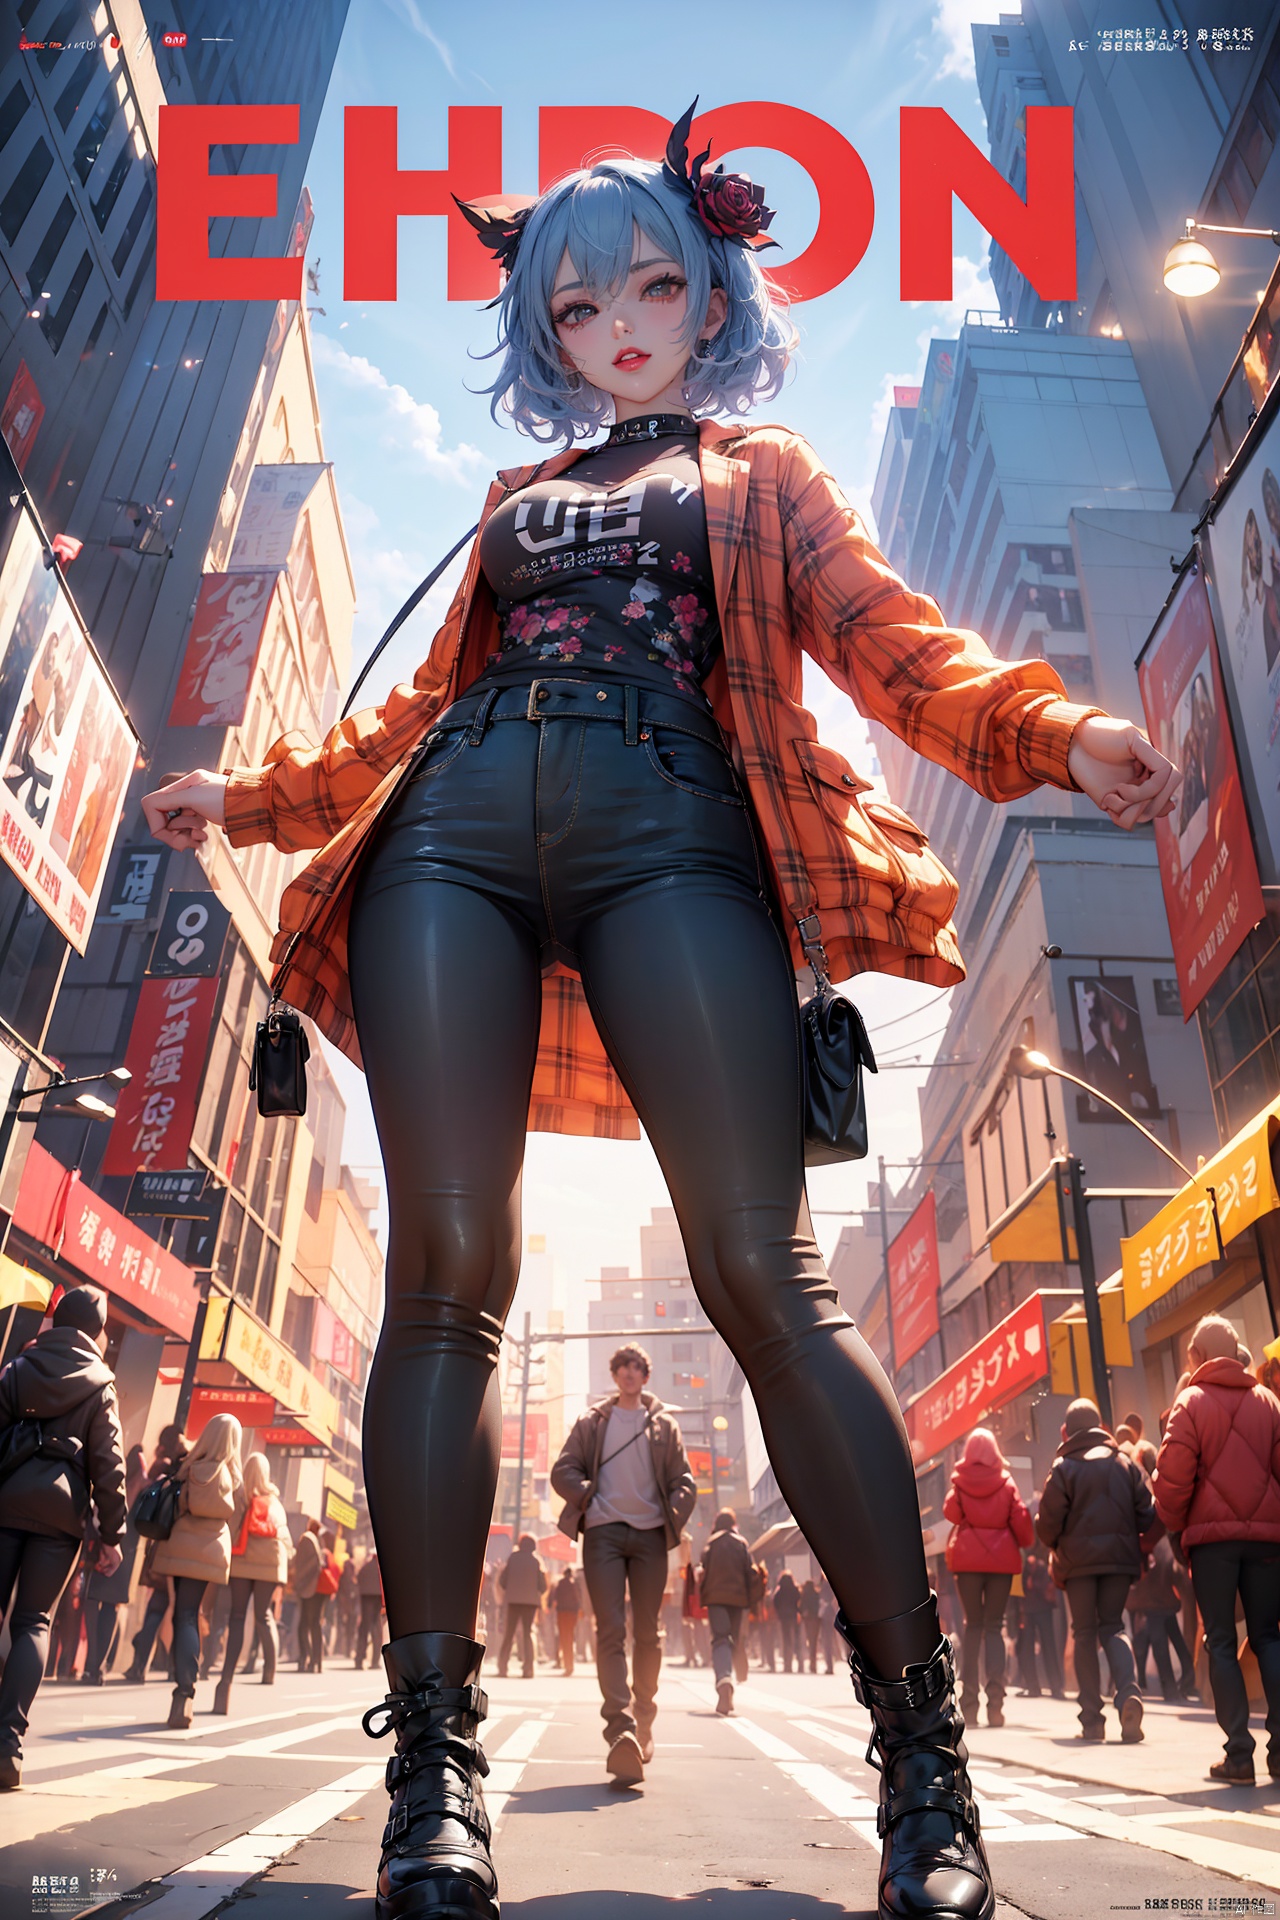  (best quality), (ultra detailed), ((masterpiece)), sfw,consored,illustration, ray tracing,contrapposto, female focus,model,NSFW
//////////////////////////
sexy, fine fabric emphasis,wall paper, crowds, fashion, Lipstick, depth of field, street, in public,(Magazine cover:1.2),(title),(Magazine cover-style illustration of a fashionable woman), posing in front of a colorful and dynamic background. (The text on the cover should be bold and attention-grabbing, with the title of the magazine and a catchy headline)., yutu honkai3rd